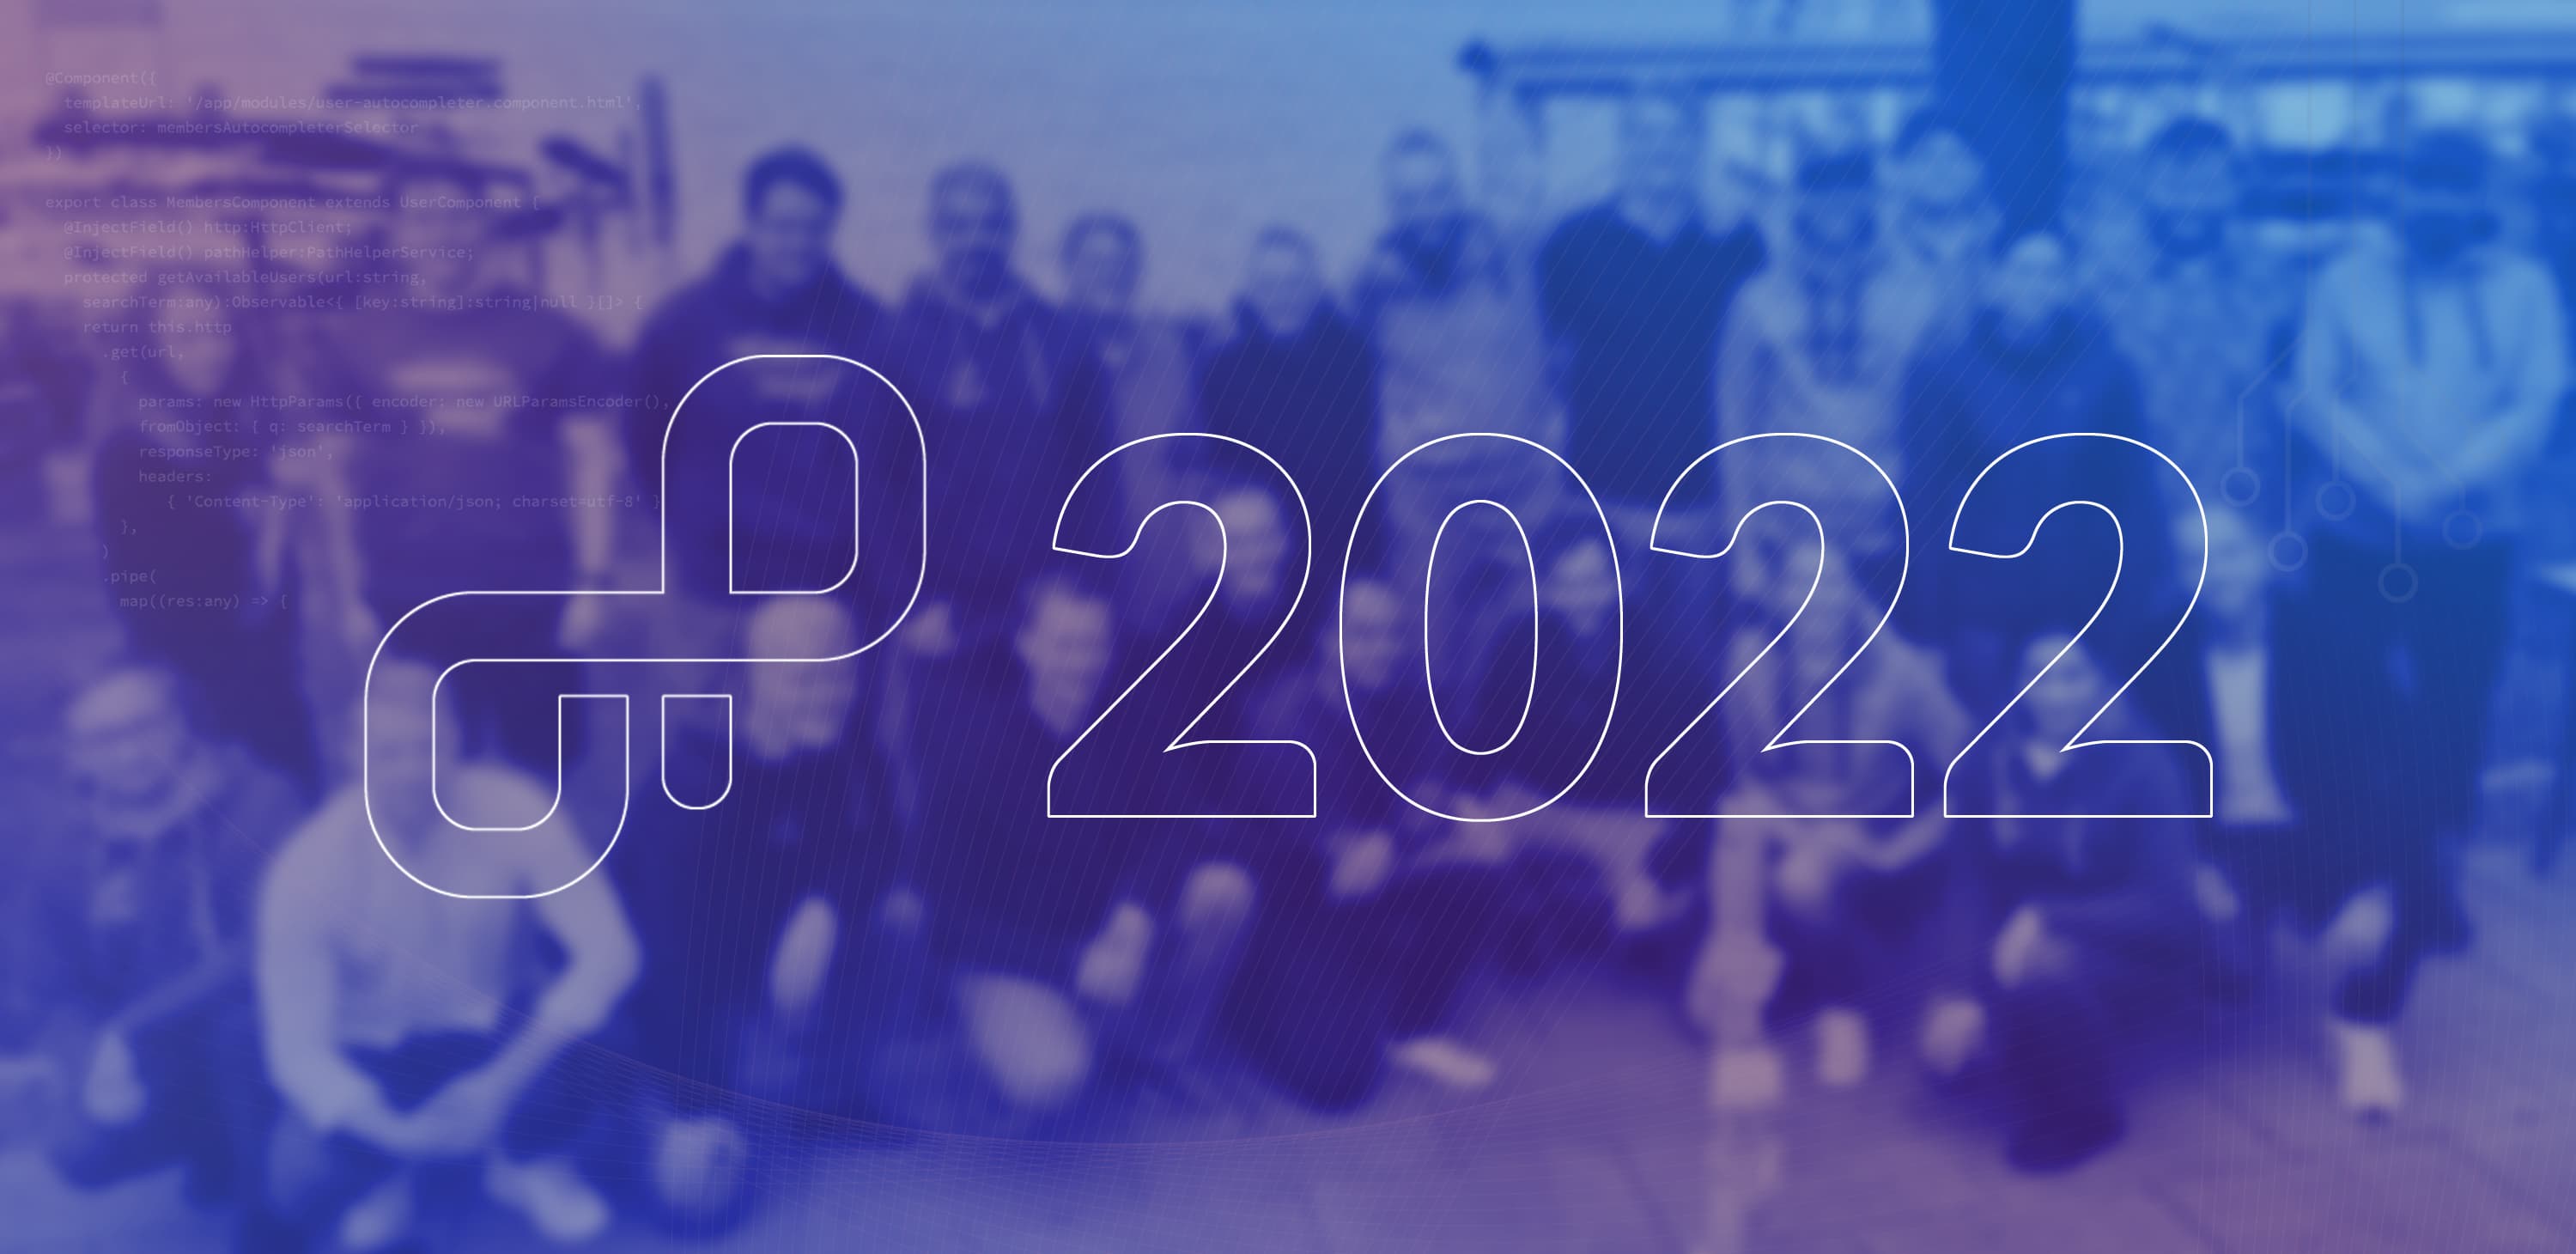 OpenProject’s highlights 2022